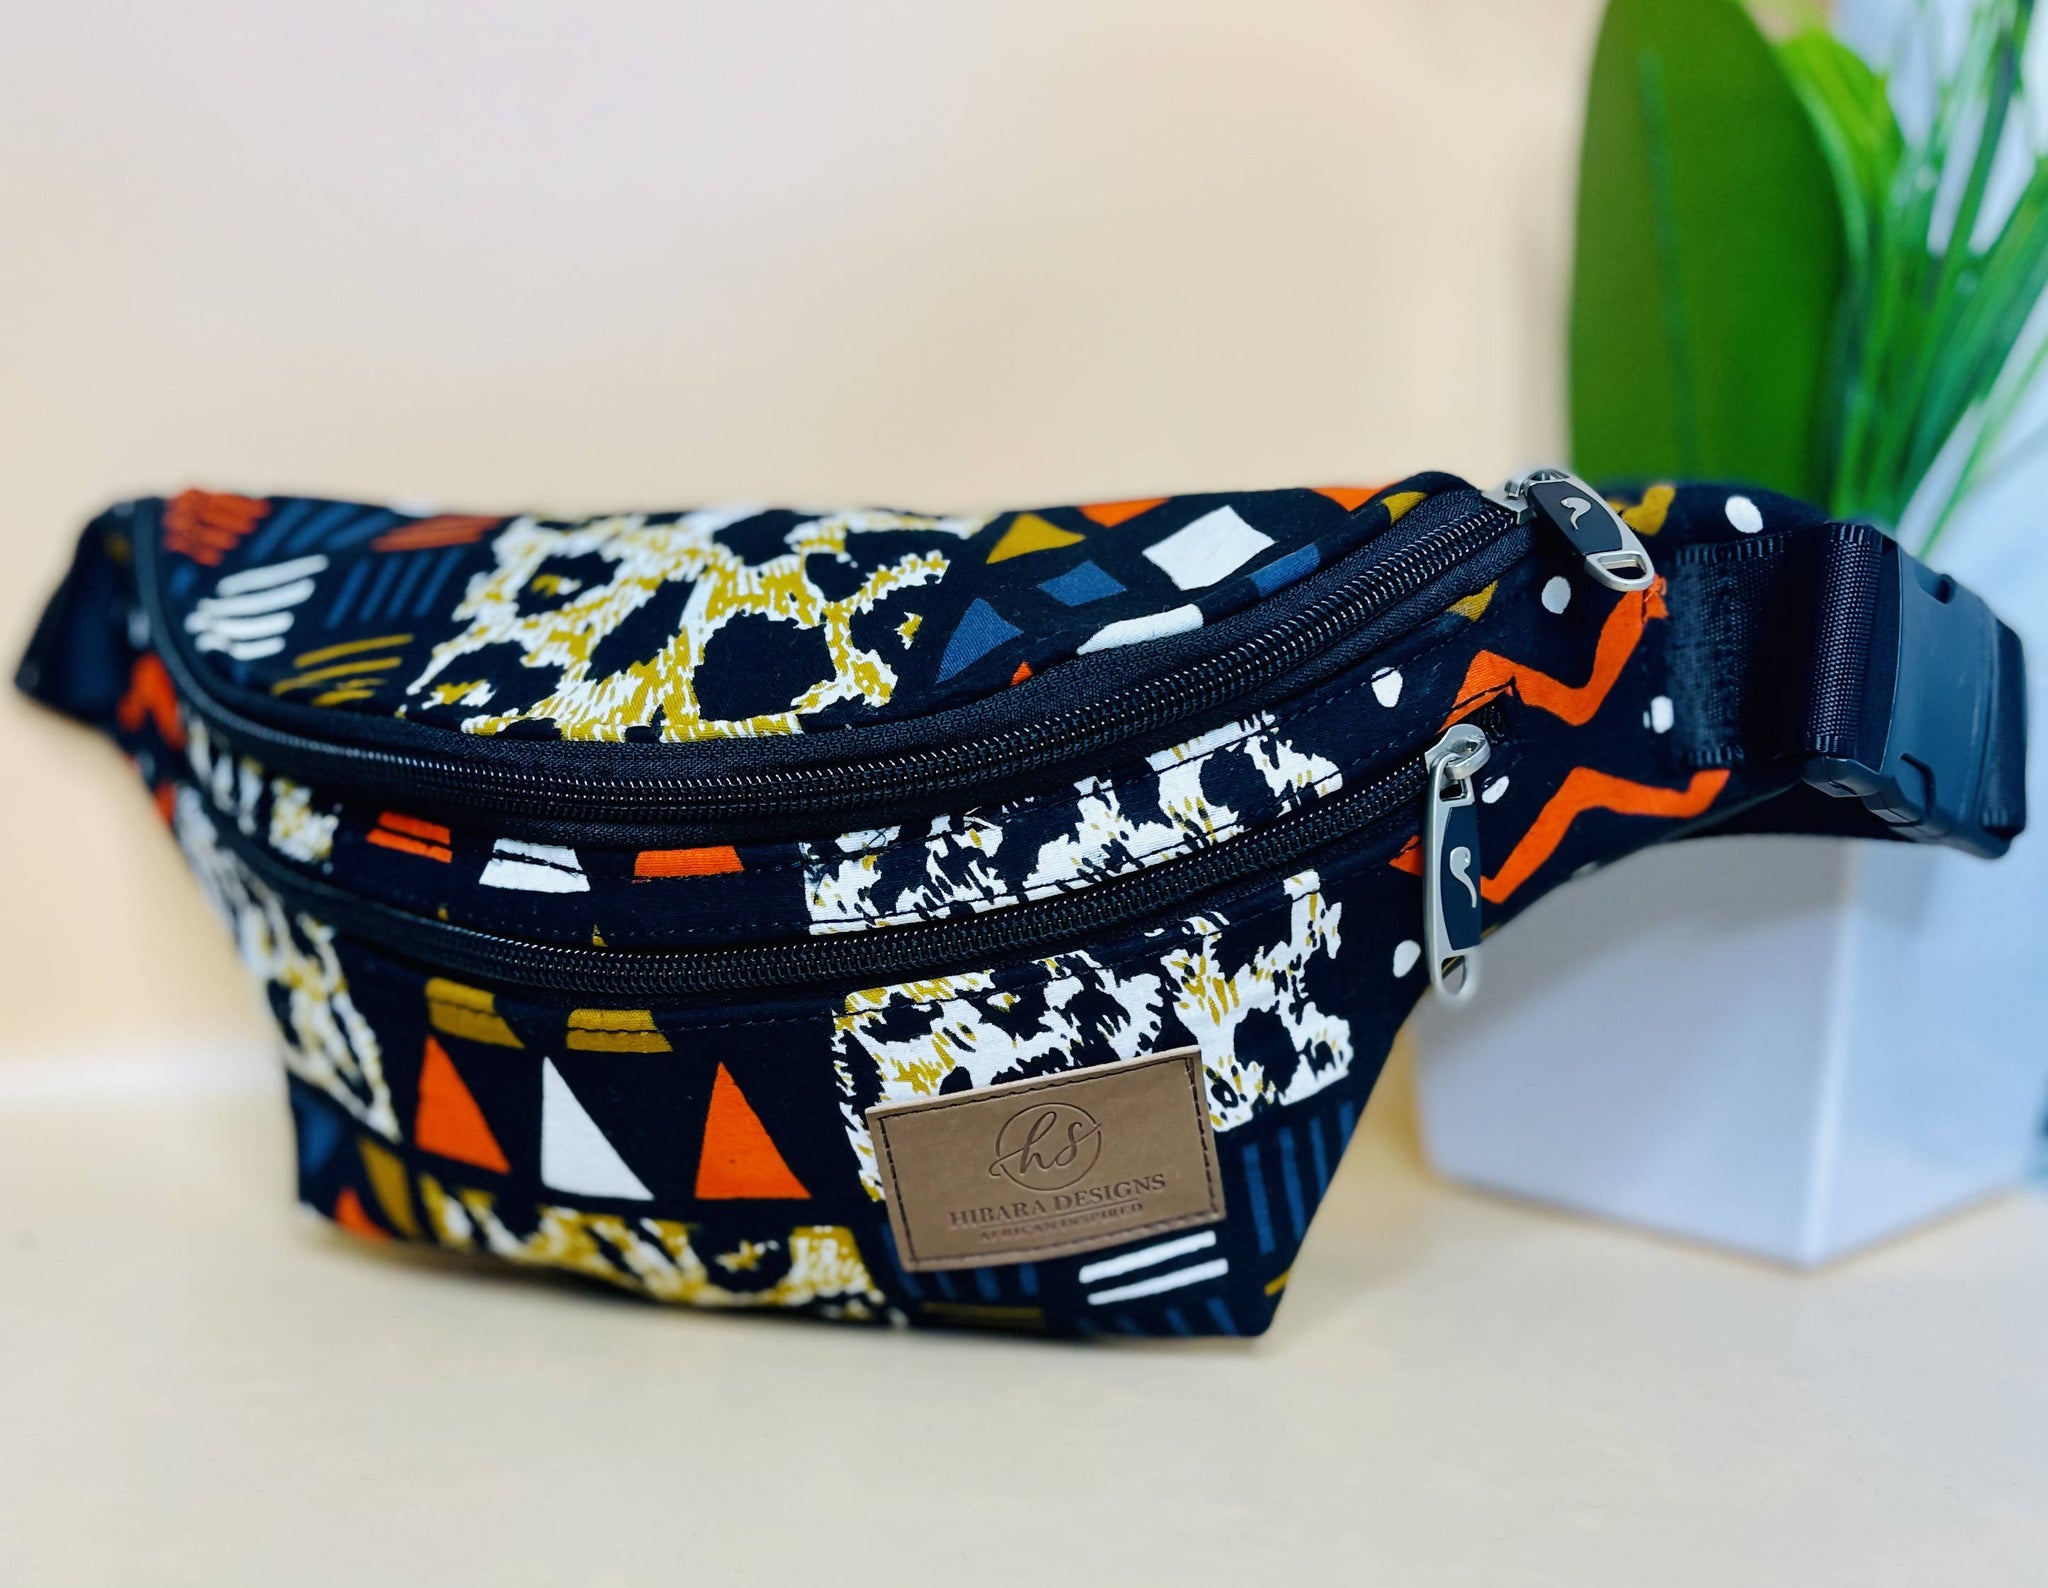 Arinze Large Fanny pack